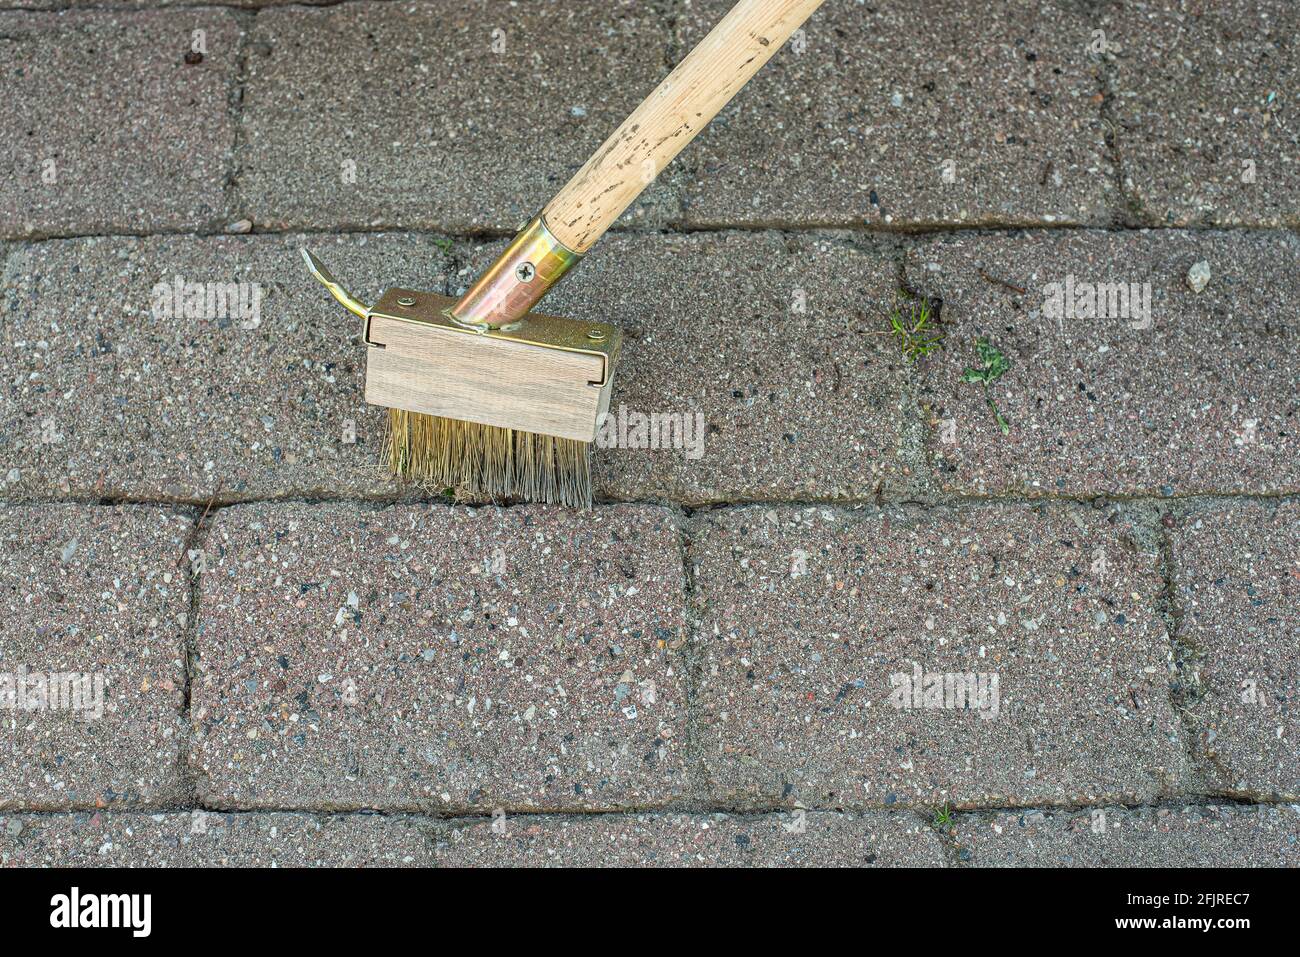 spring work in the garden, clear stone slabs from weeds with a wire brush on a stick, Denmark, April 19, 2021 Stock Photo